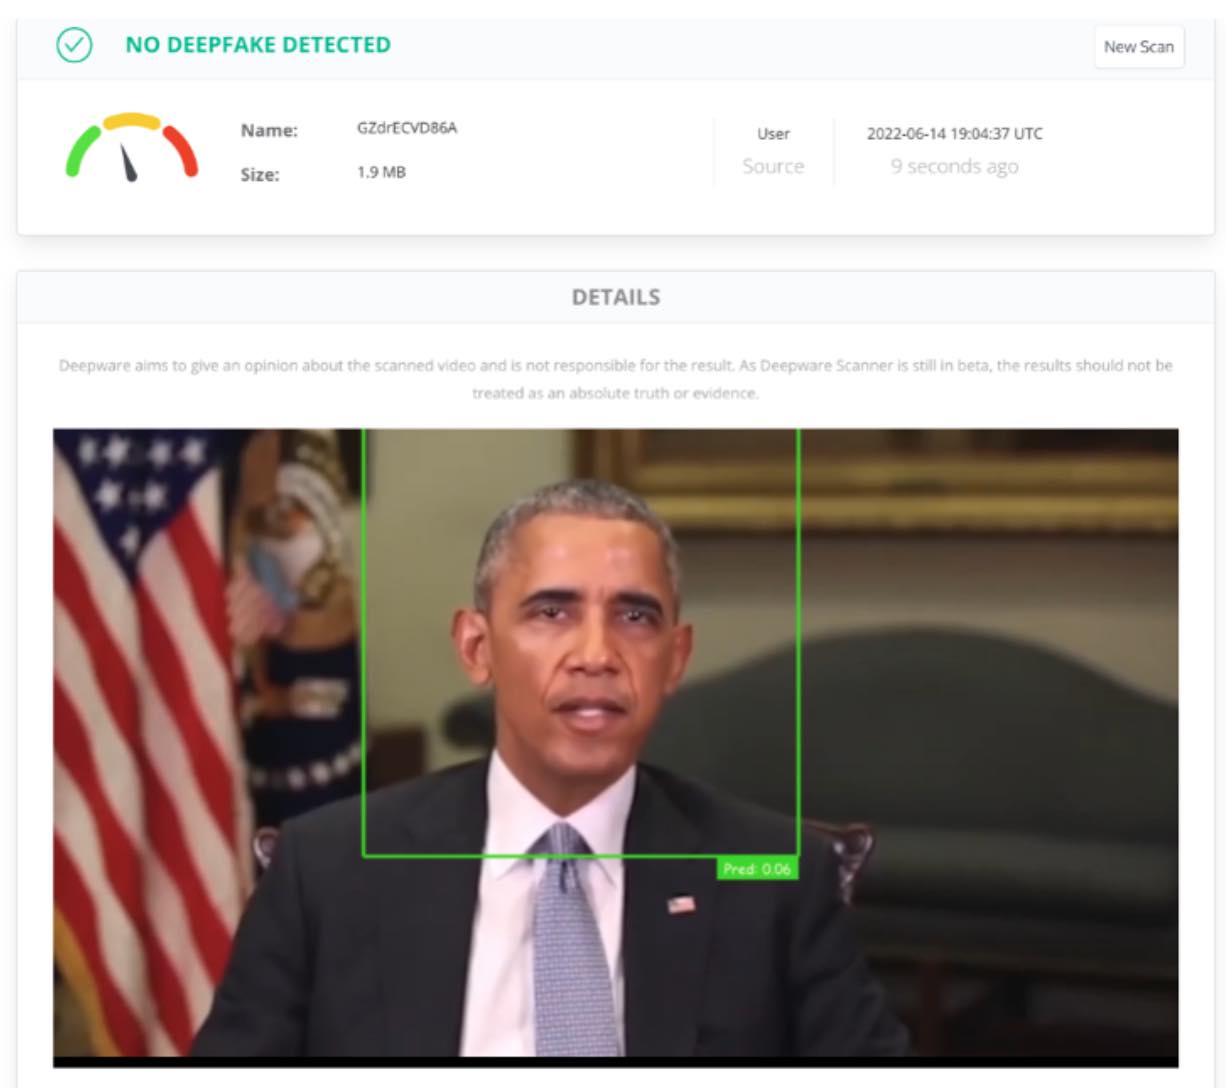  When we lowered the resolution and edited out the end of the video clip of President Obama’s deepfake, it was detected as “not a deepfake”.